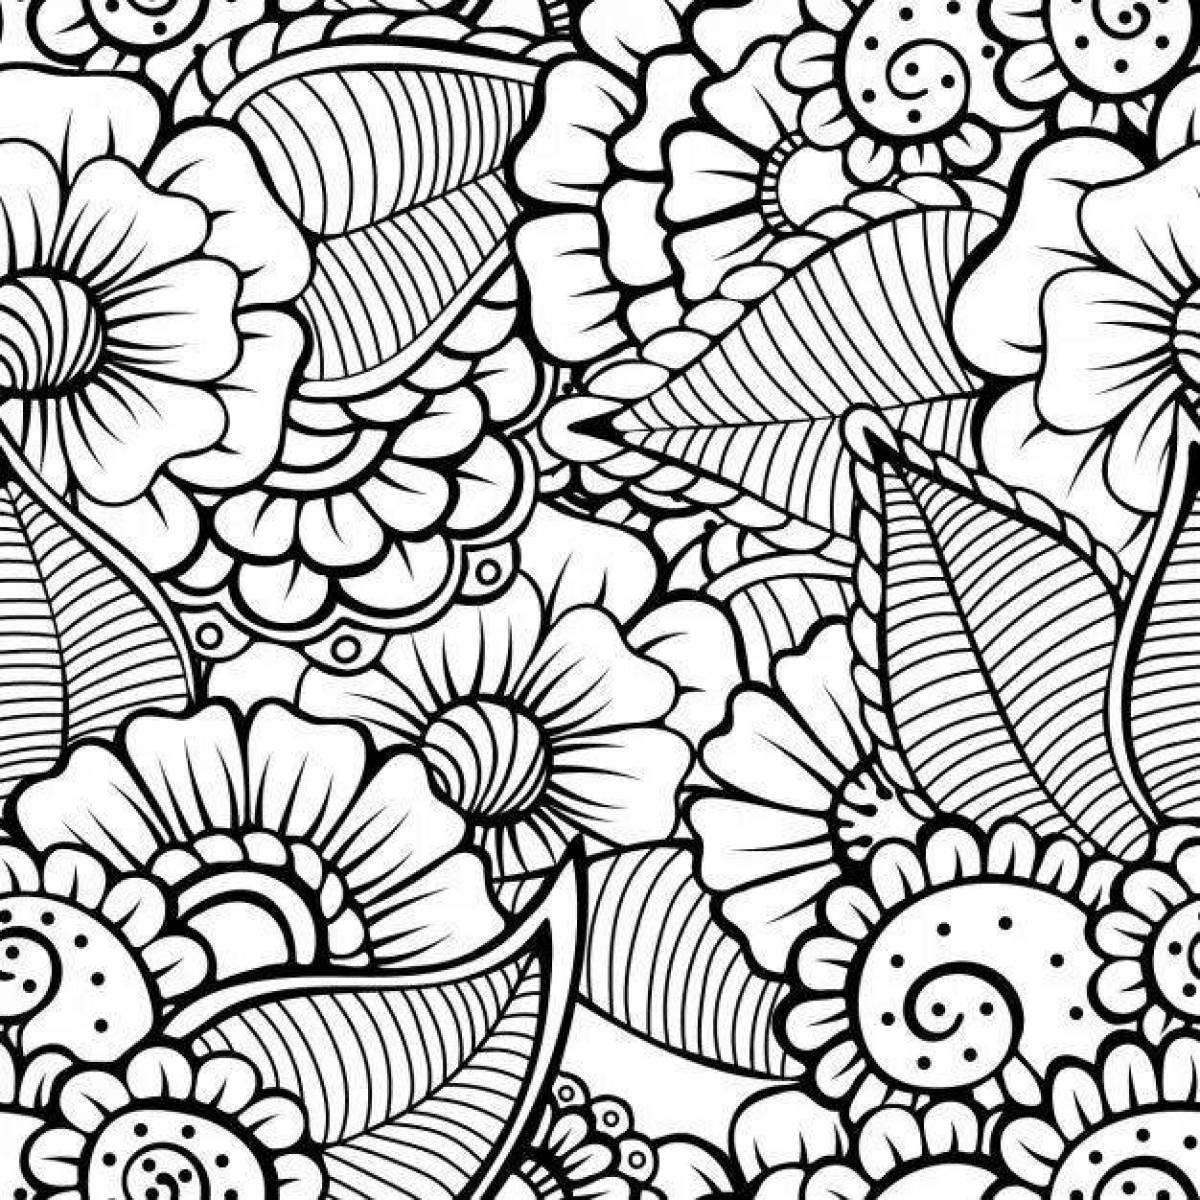 Fascinating anti-stress coloring by numbers